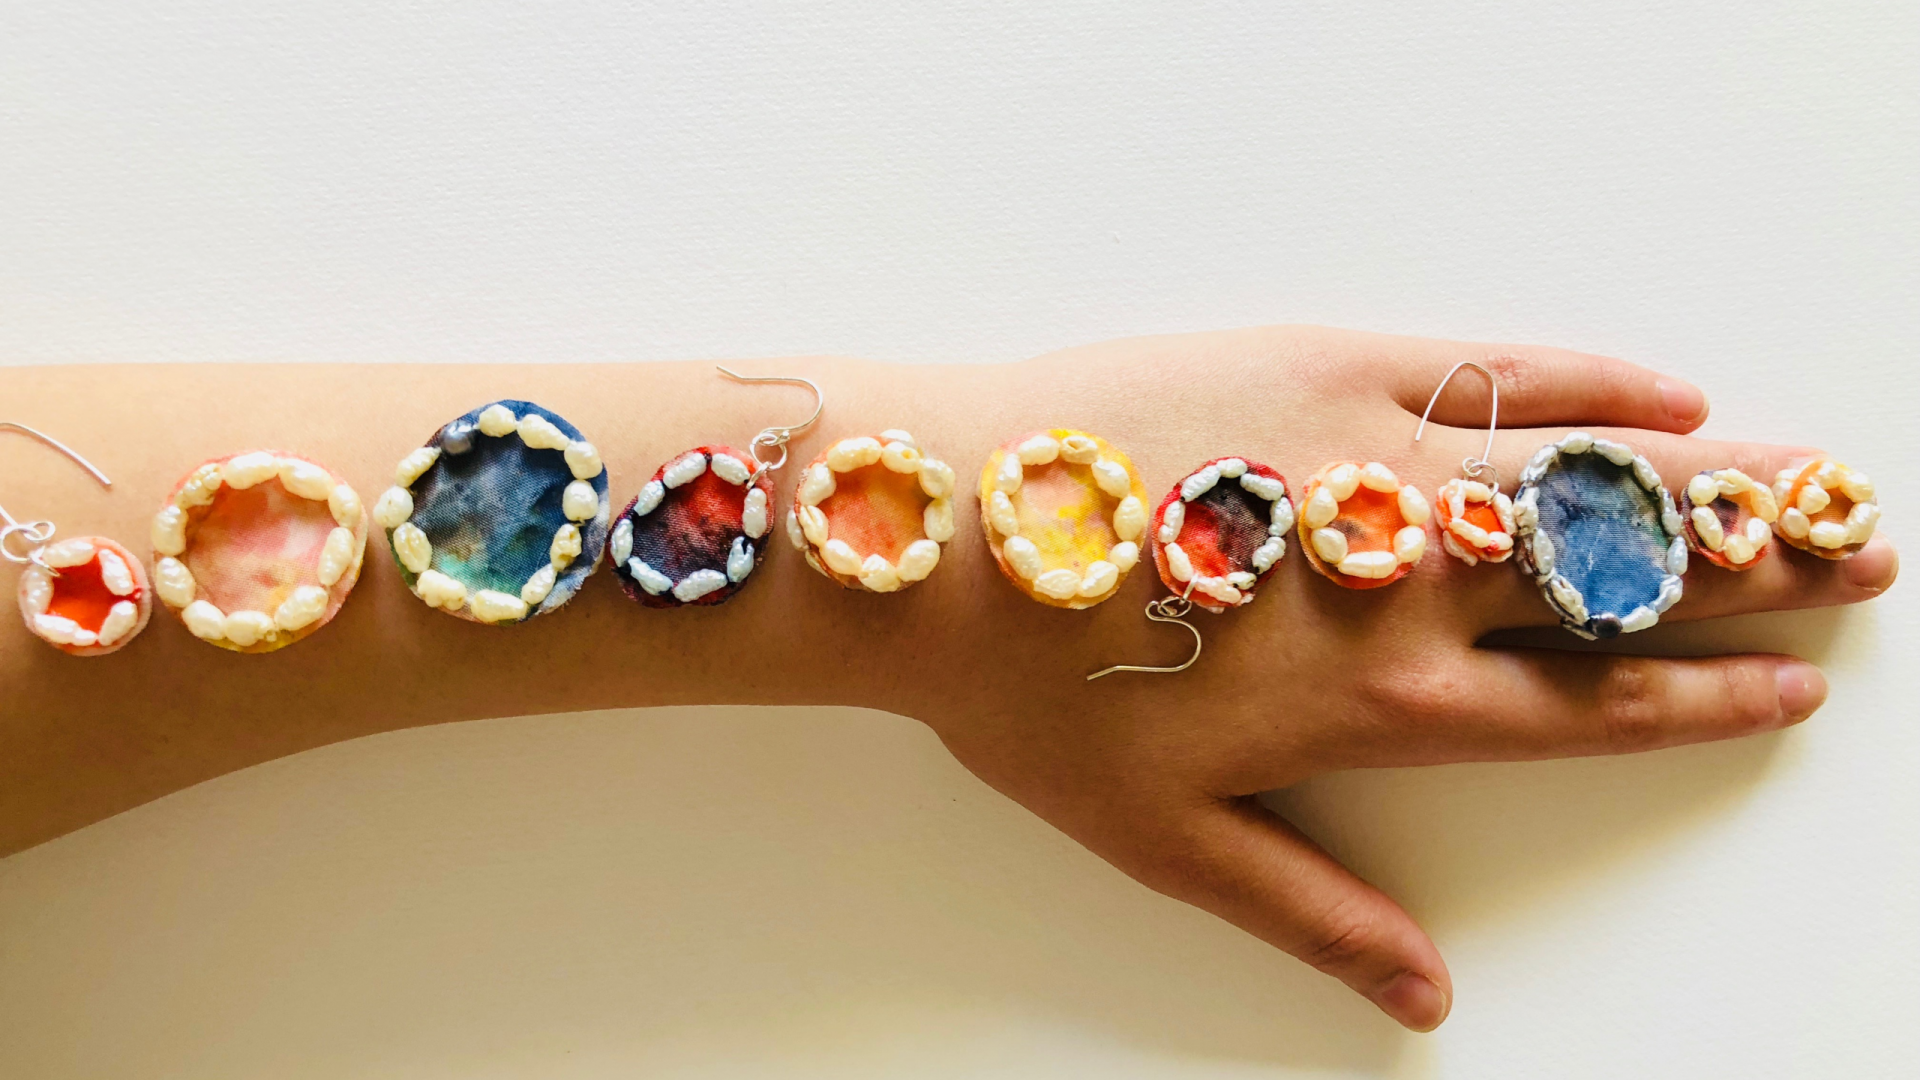 An arm with various jewellery adornments made with rice paper